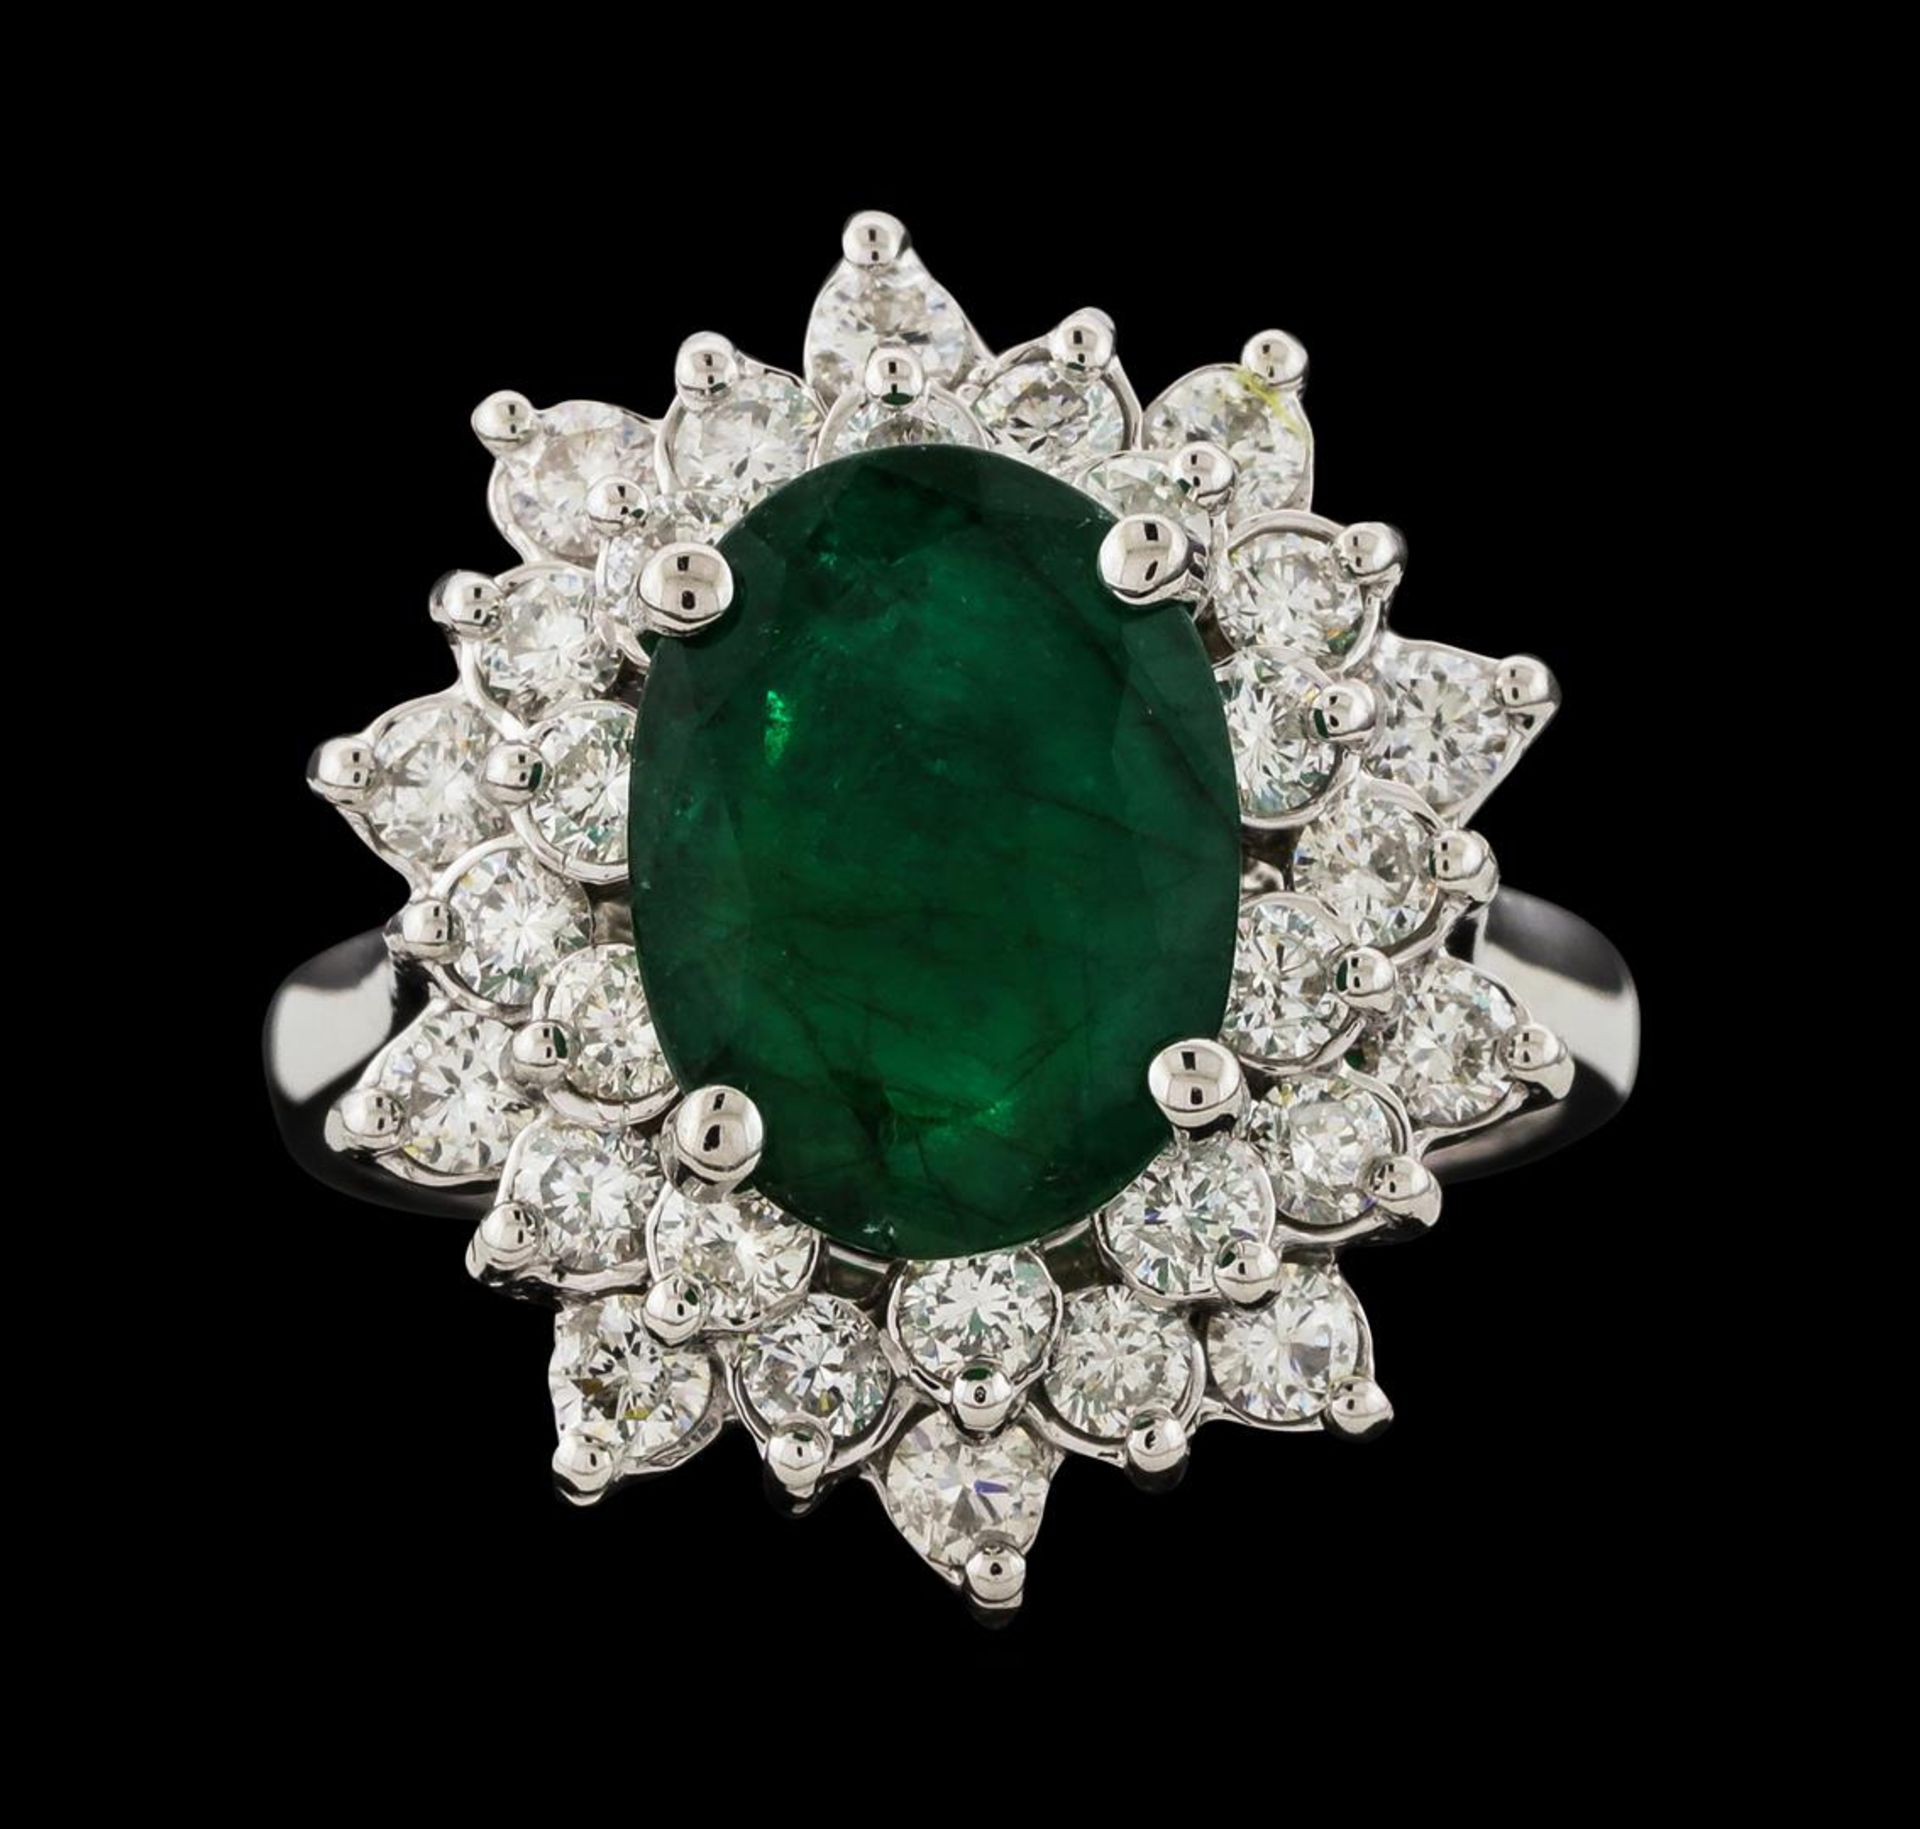 3.30 ctw Emerald and Diamond Ring - 14KT White Gold - Image 2 of 5